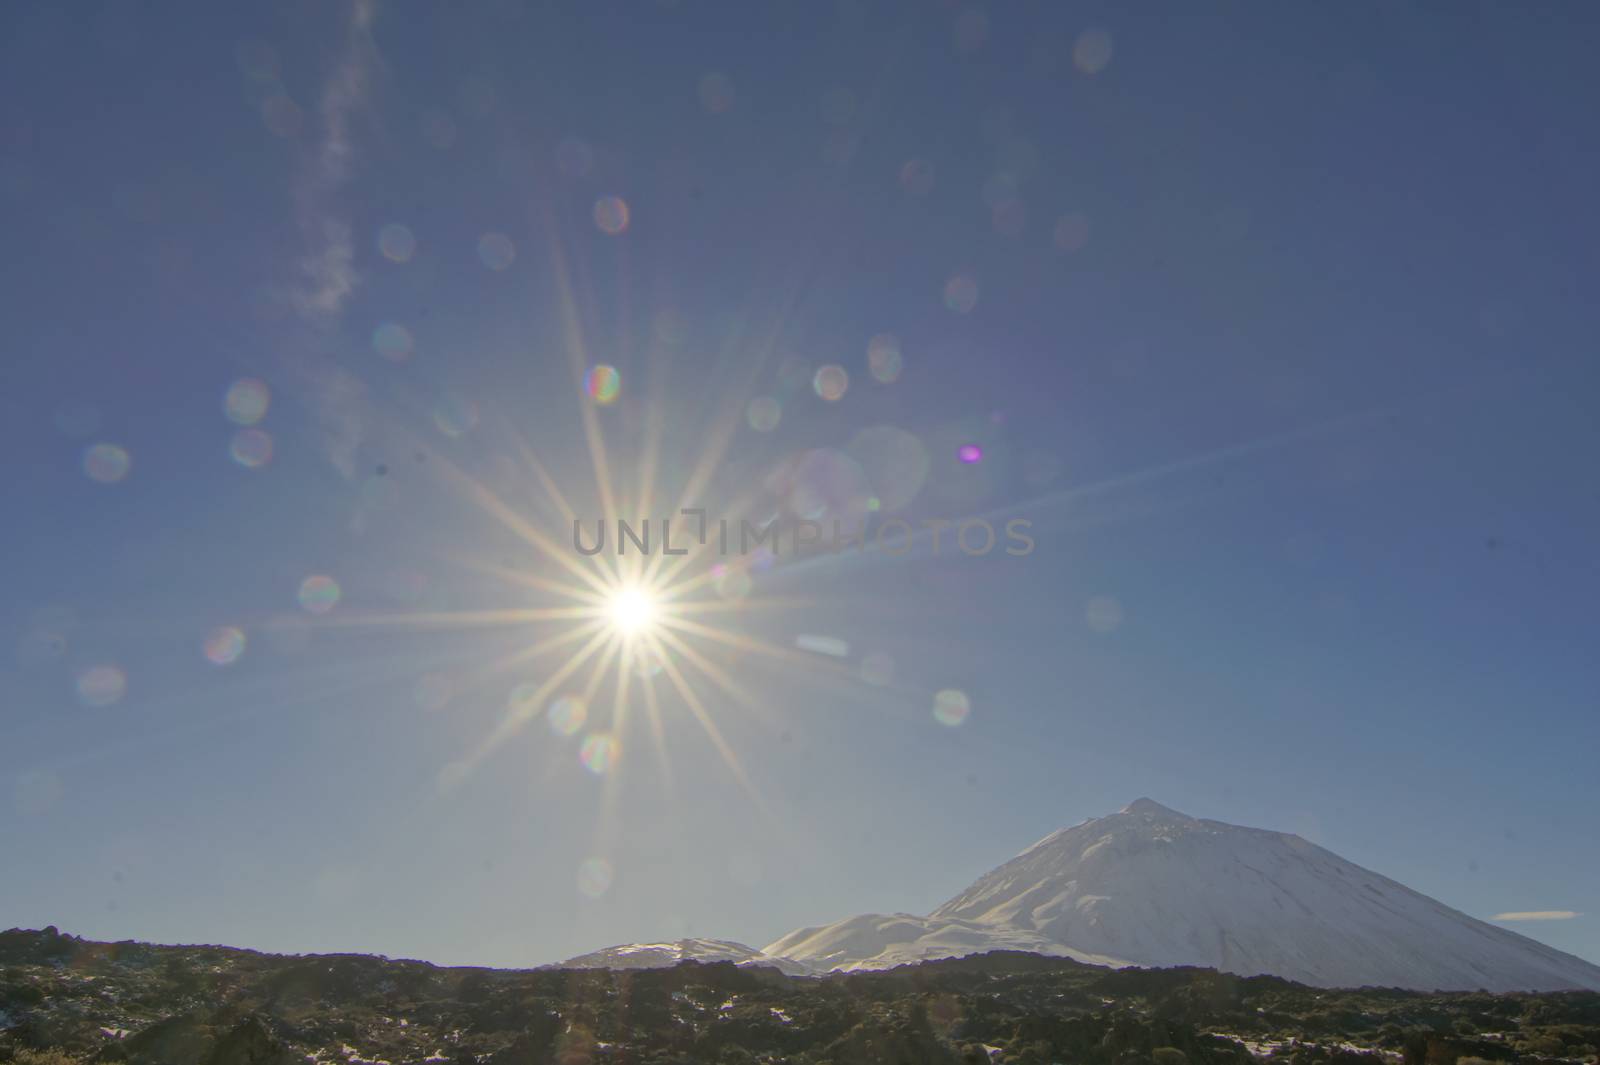 Hdr Picture Backlight Sunbeams and Snow on Teide Tenerife Canary Islands